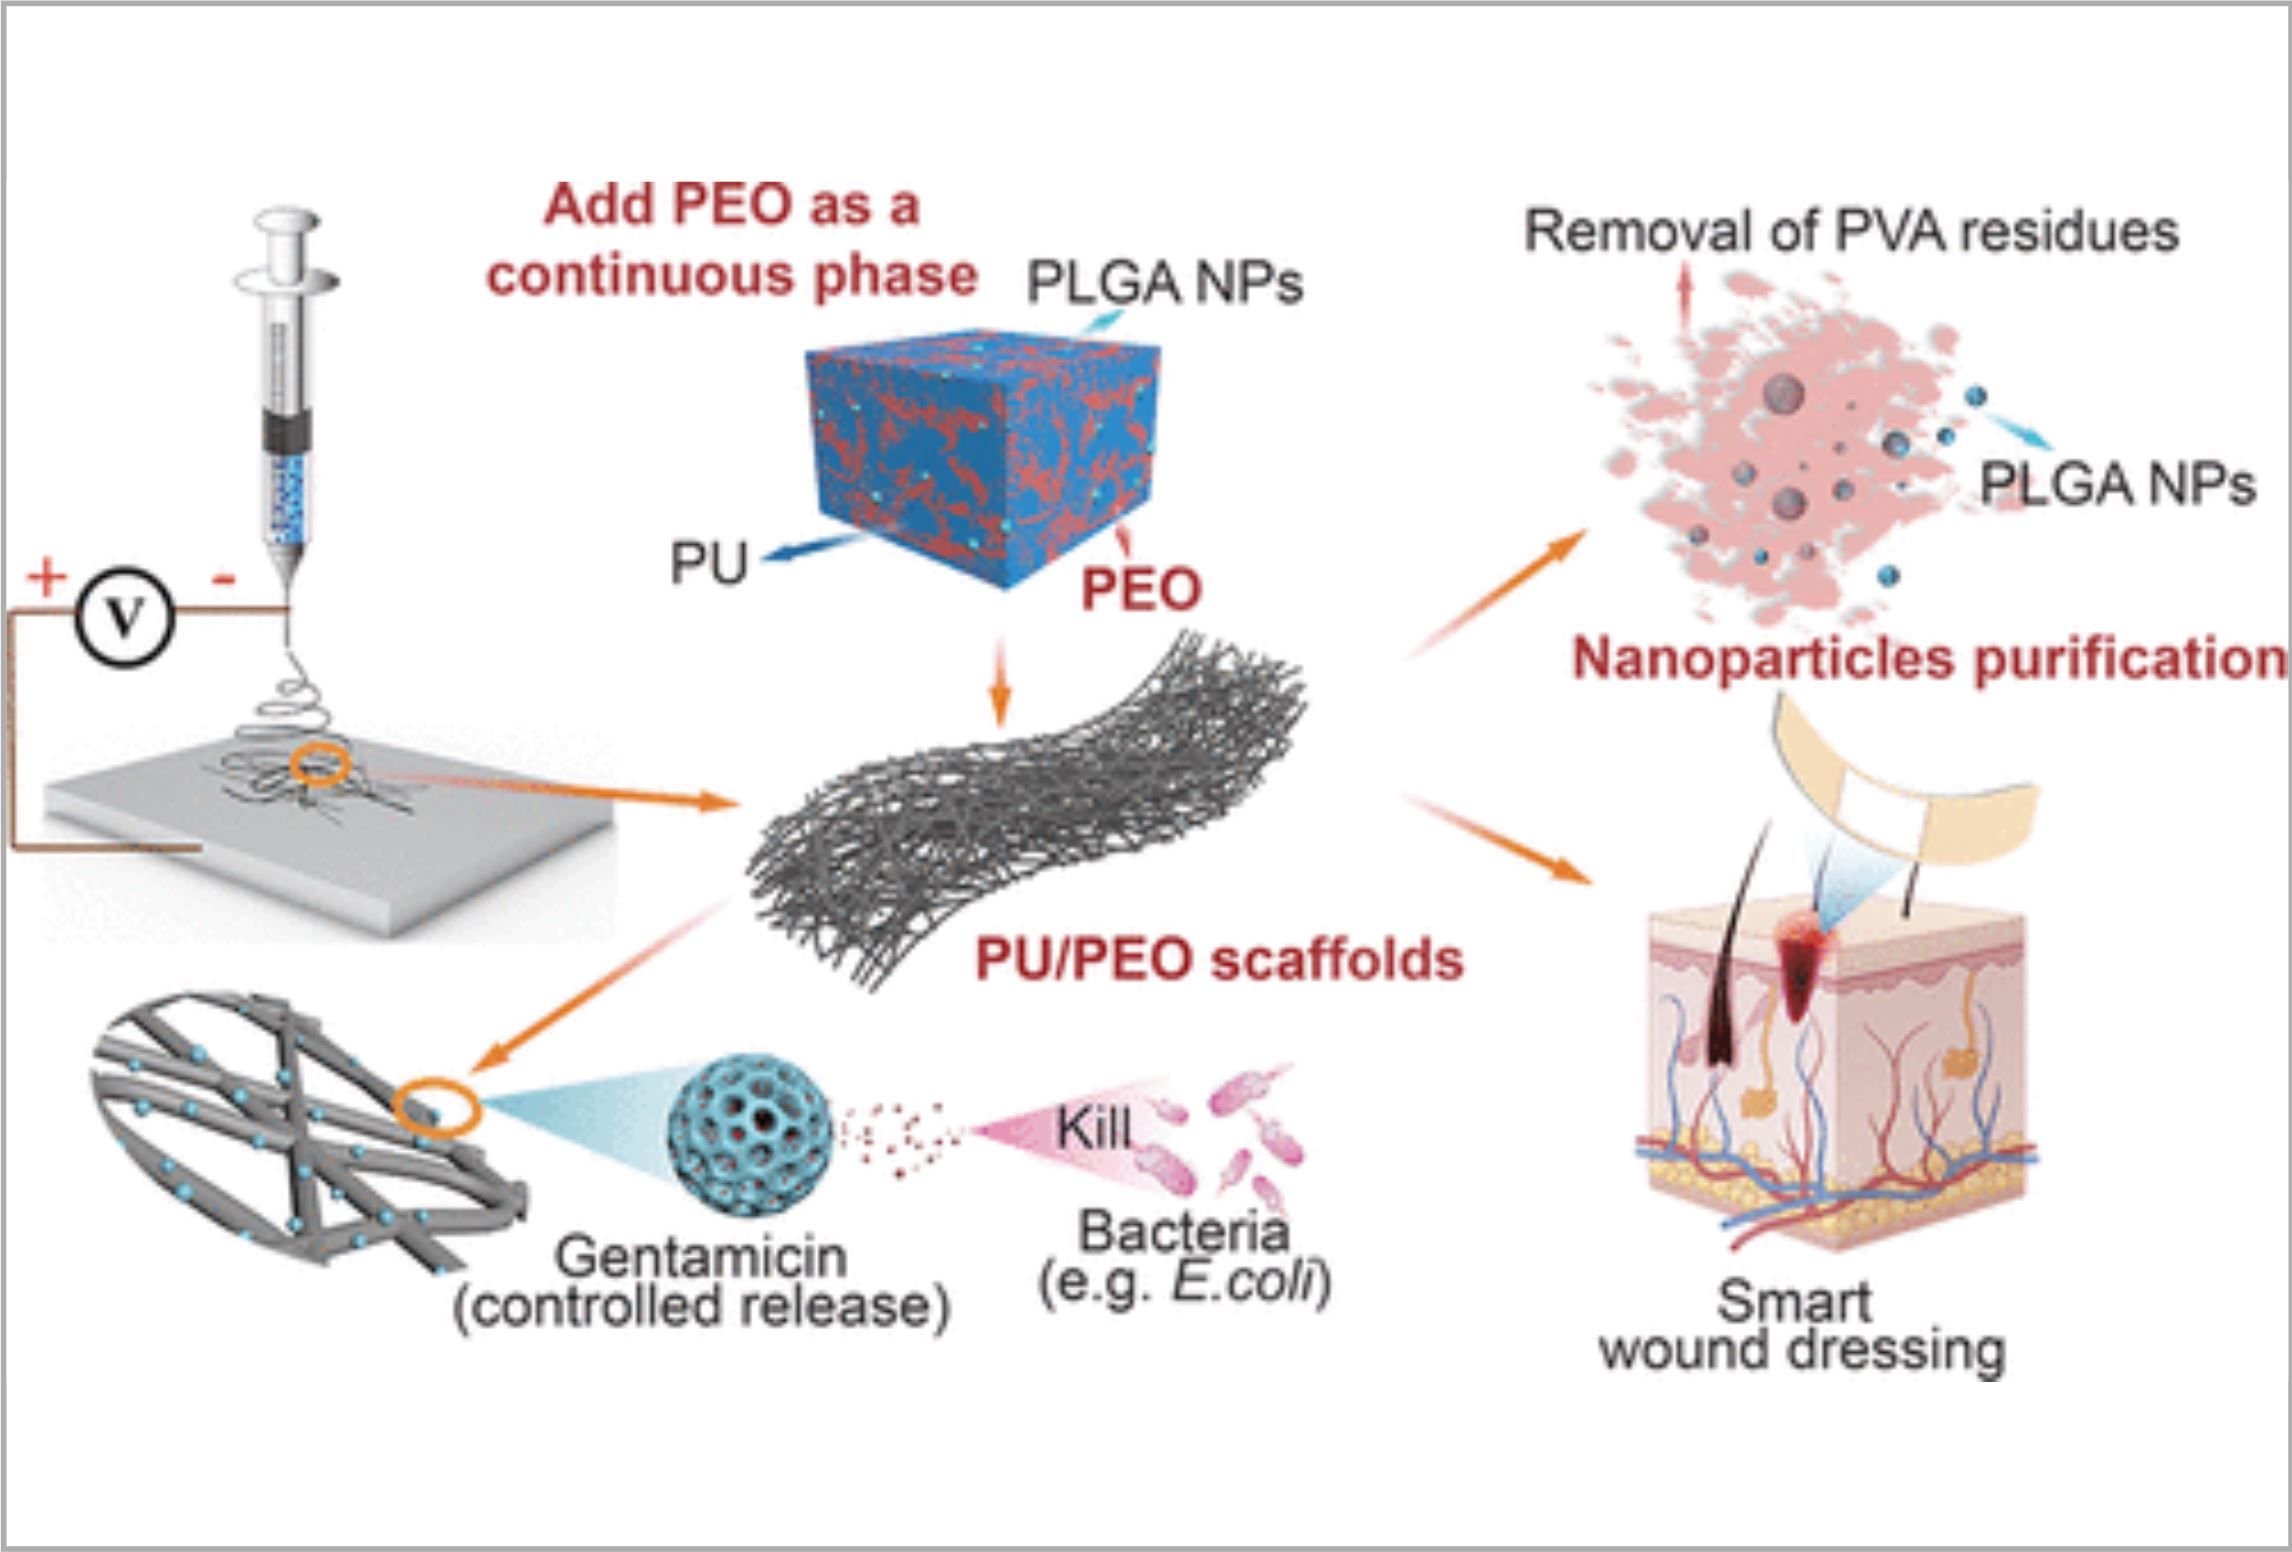 Incorporation of Gentamicin-Encapsulated Poly(lactic-co-glycolic acid) Nanoparticles into Polyurethane/Poly(ethylene oxide) Nanofiber Scaffolds for Biomedical Applications